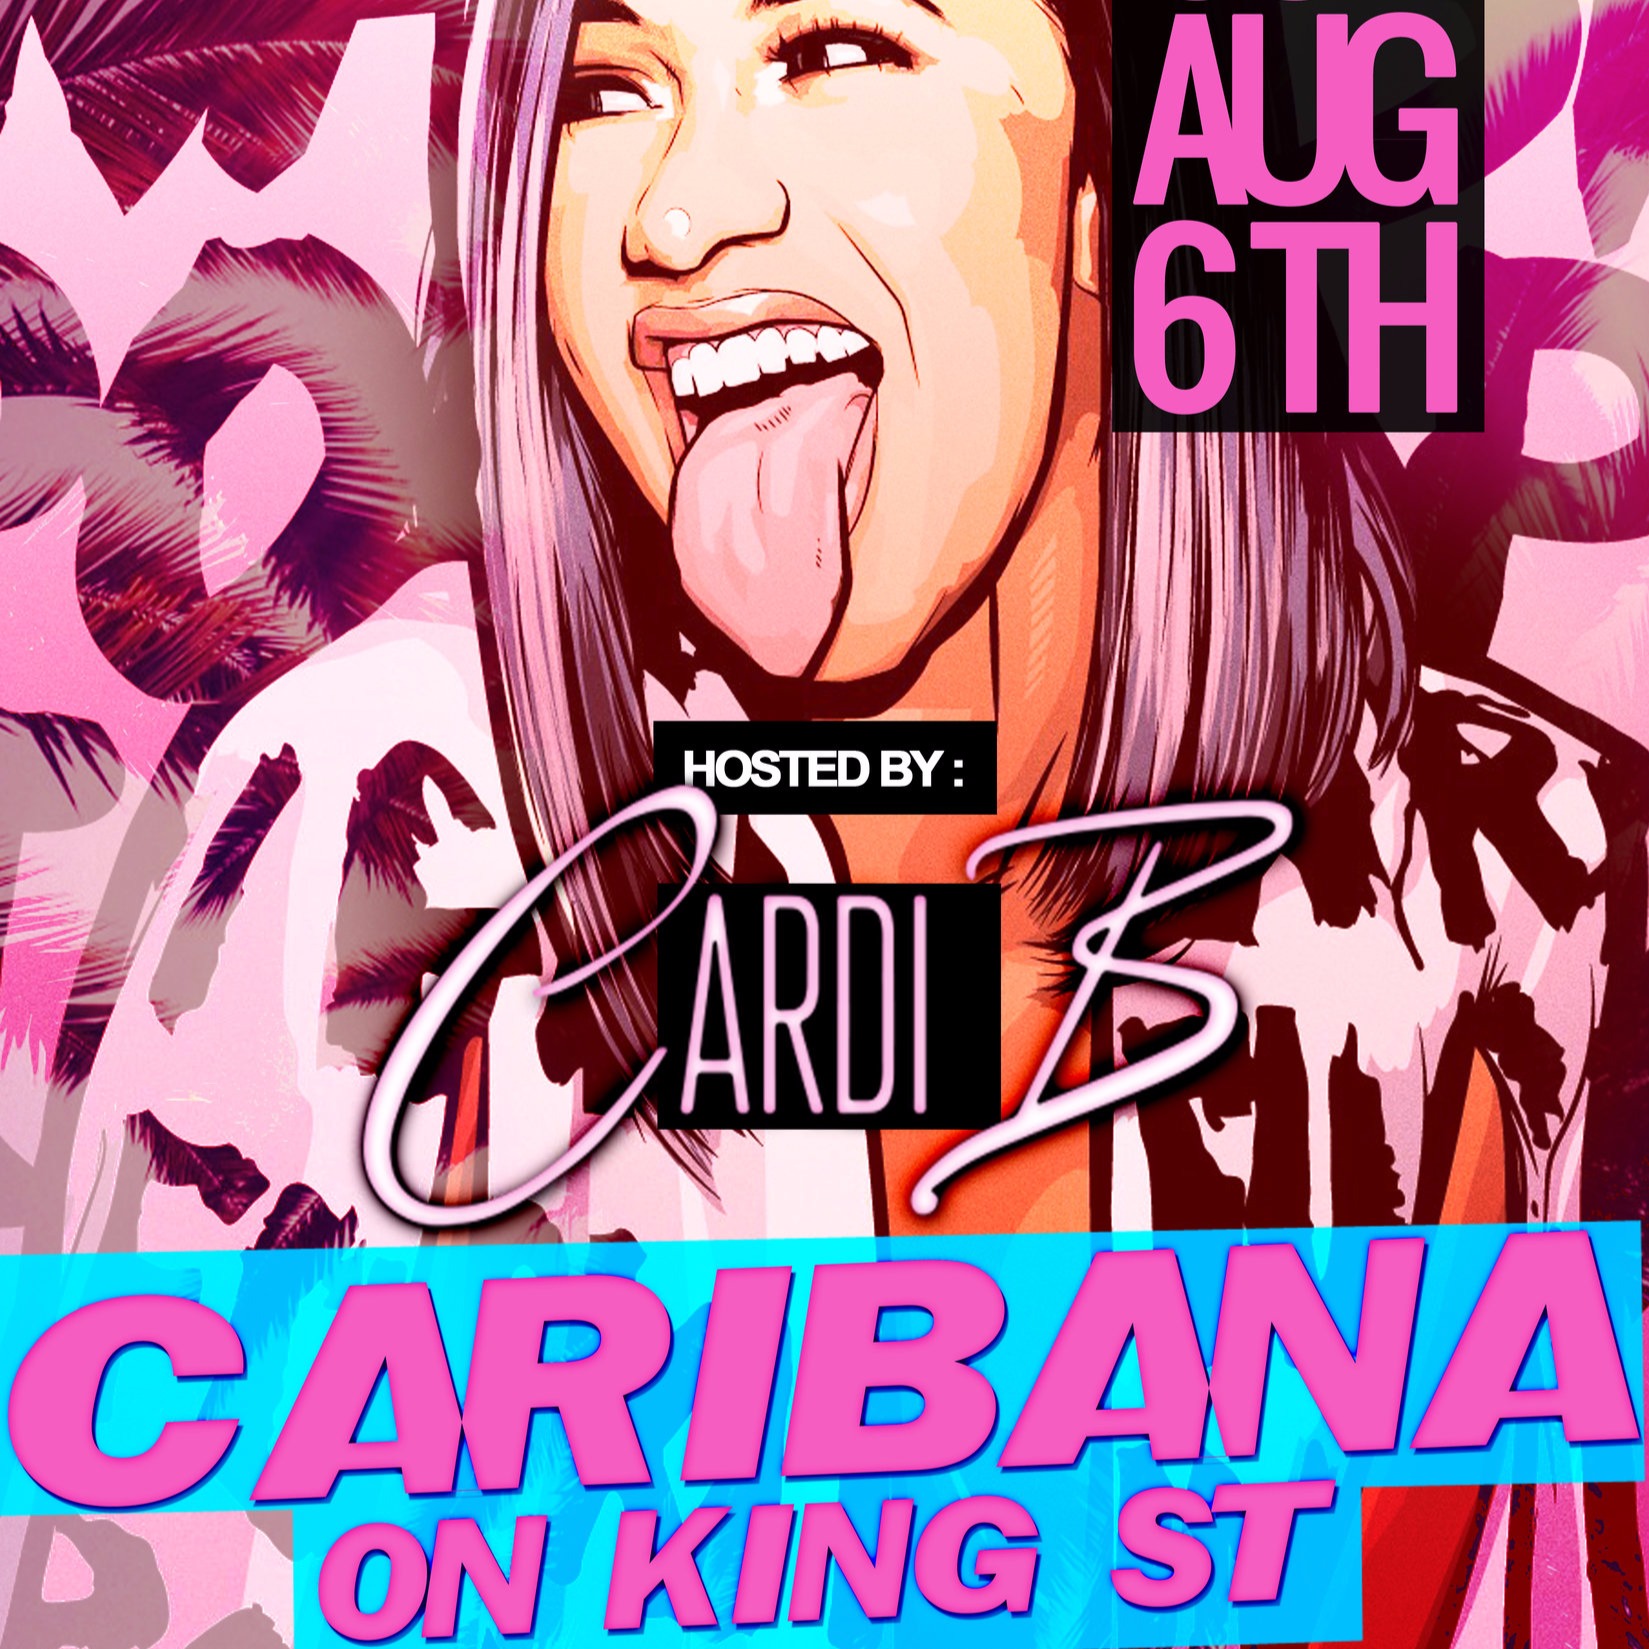 Caribana On King St. Hosted by Cardi B